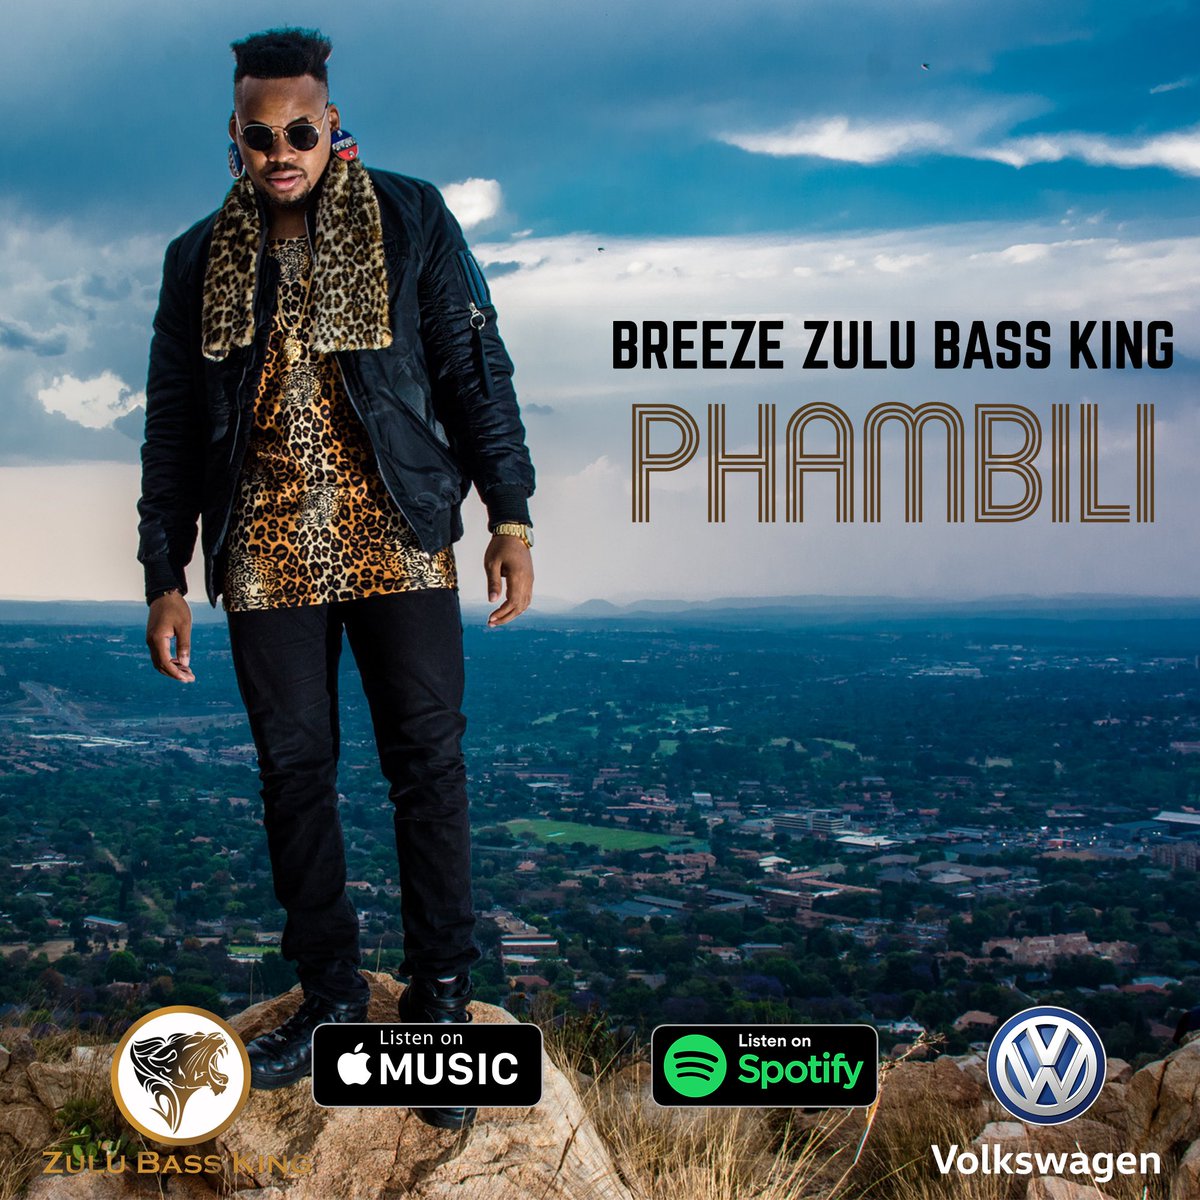 WORLD PREMIER: #PHAMBILI 🇿🇦

The Official @VolkswagenSA POLO VIVO SONG as heard on the Advert is finally available for purchase on @iTunes  @AppleMusic @SpotifySA 
#SoundOfTheNation 🇿🇦

Phambili iTunes : itunes.apple.com/za/album/phamb…

Phambili Spotify : open.spotify.com/album/0pftk2QH…